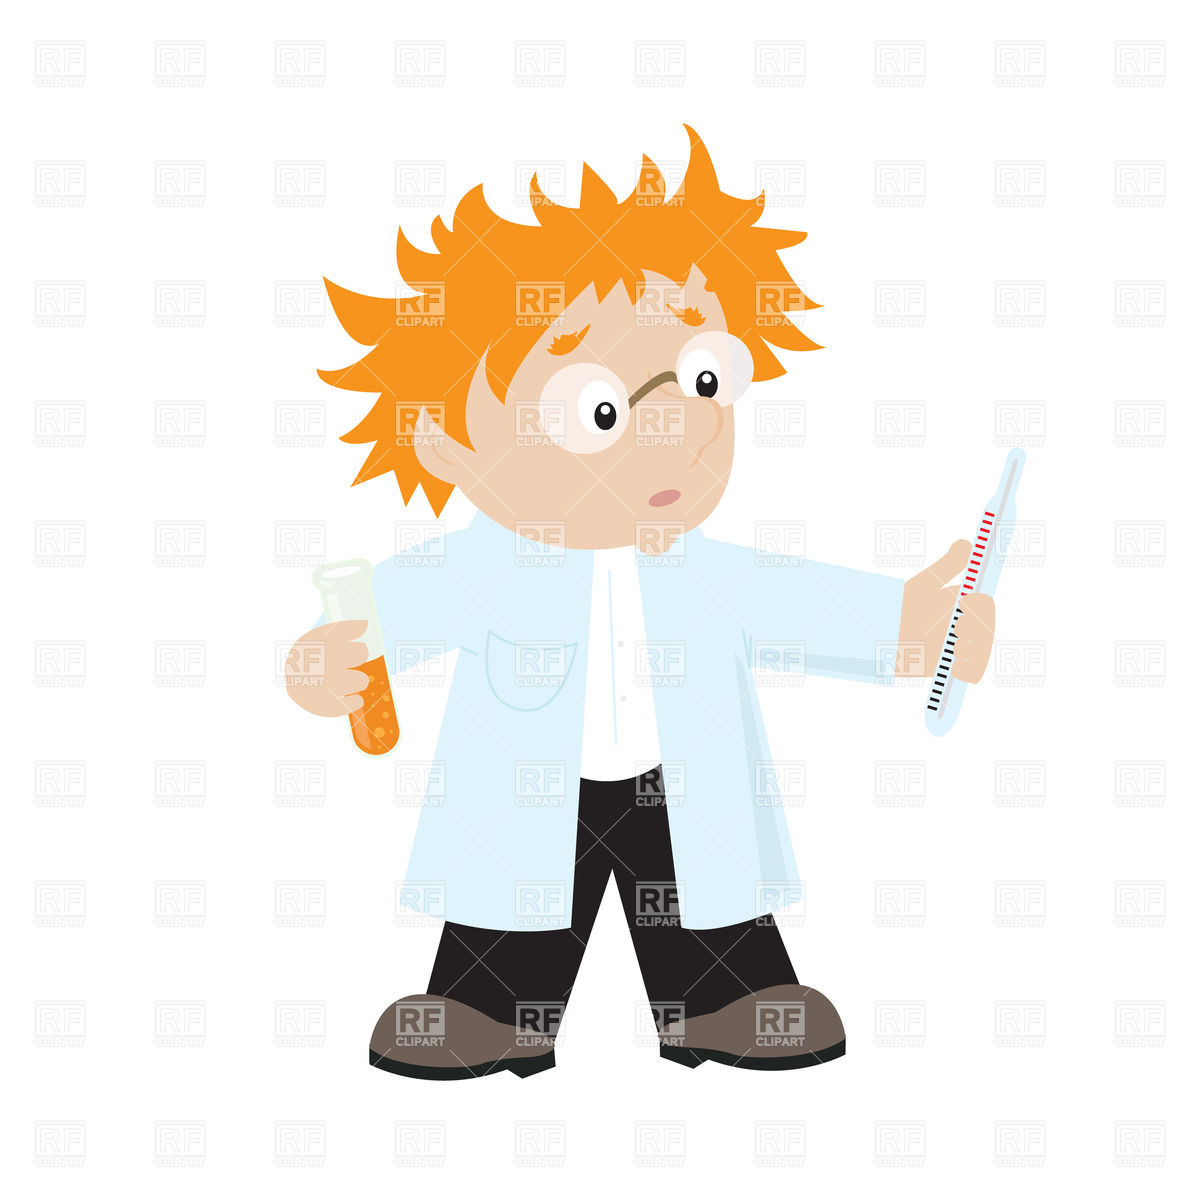     Haired Cartoon Scientist Download Royalty Free Vector Clipart  Eps